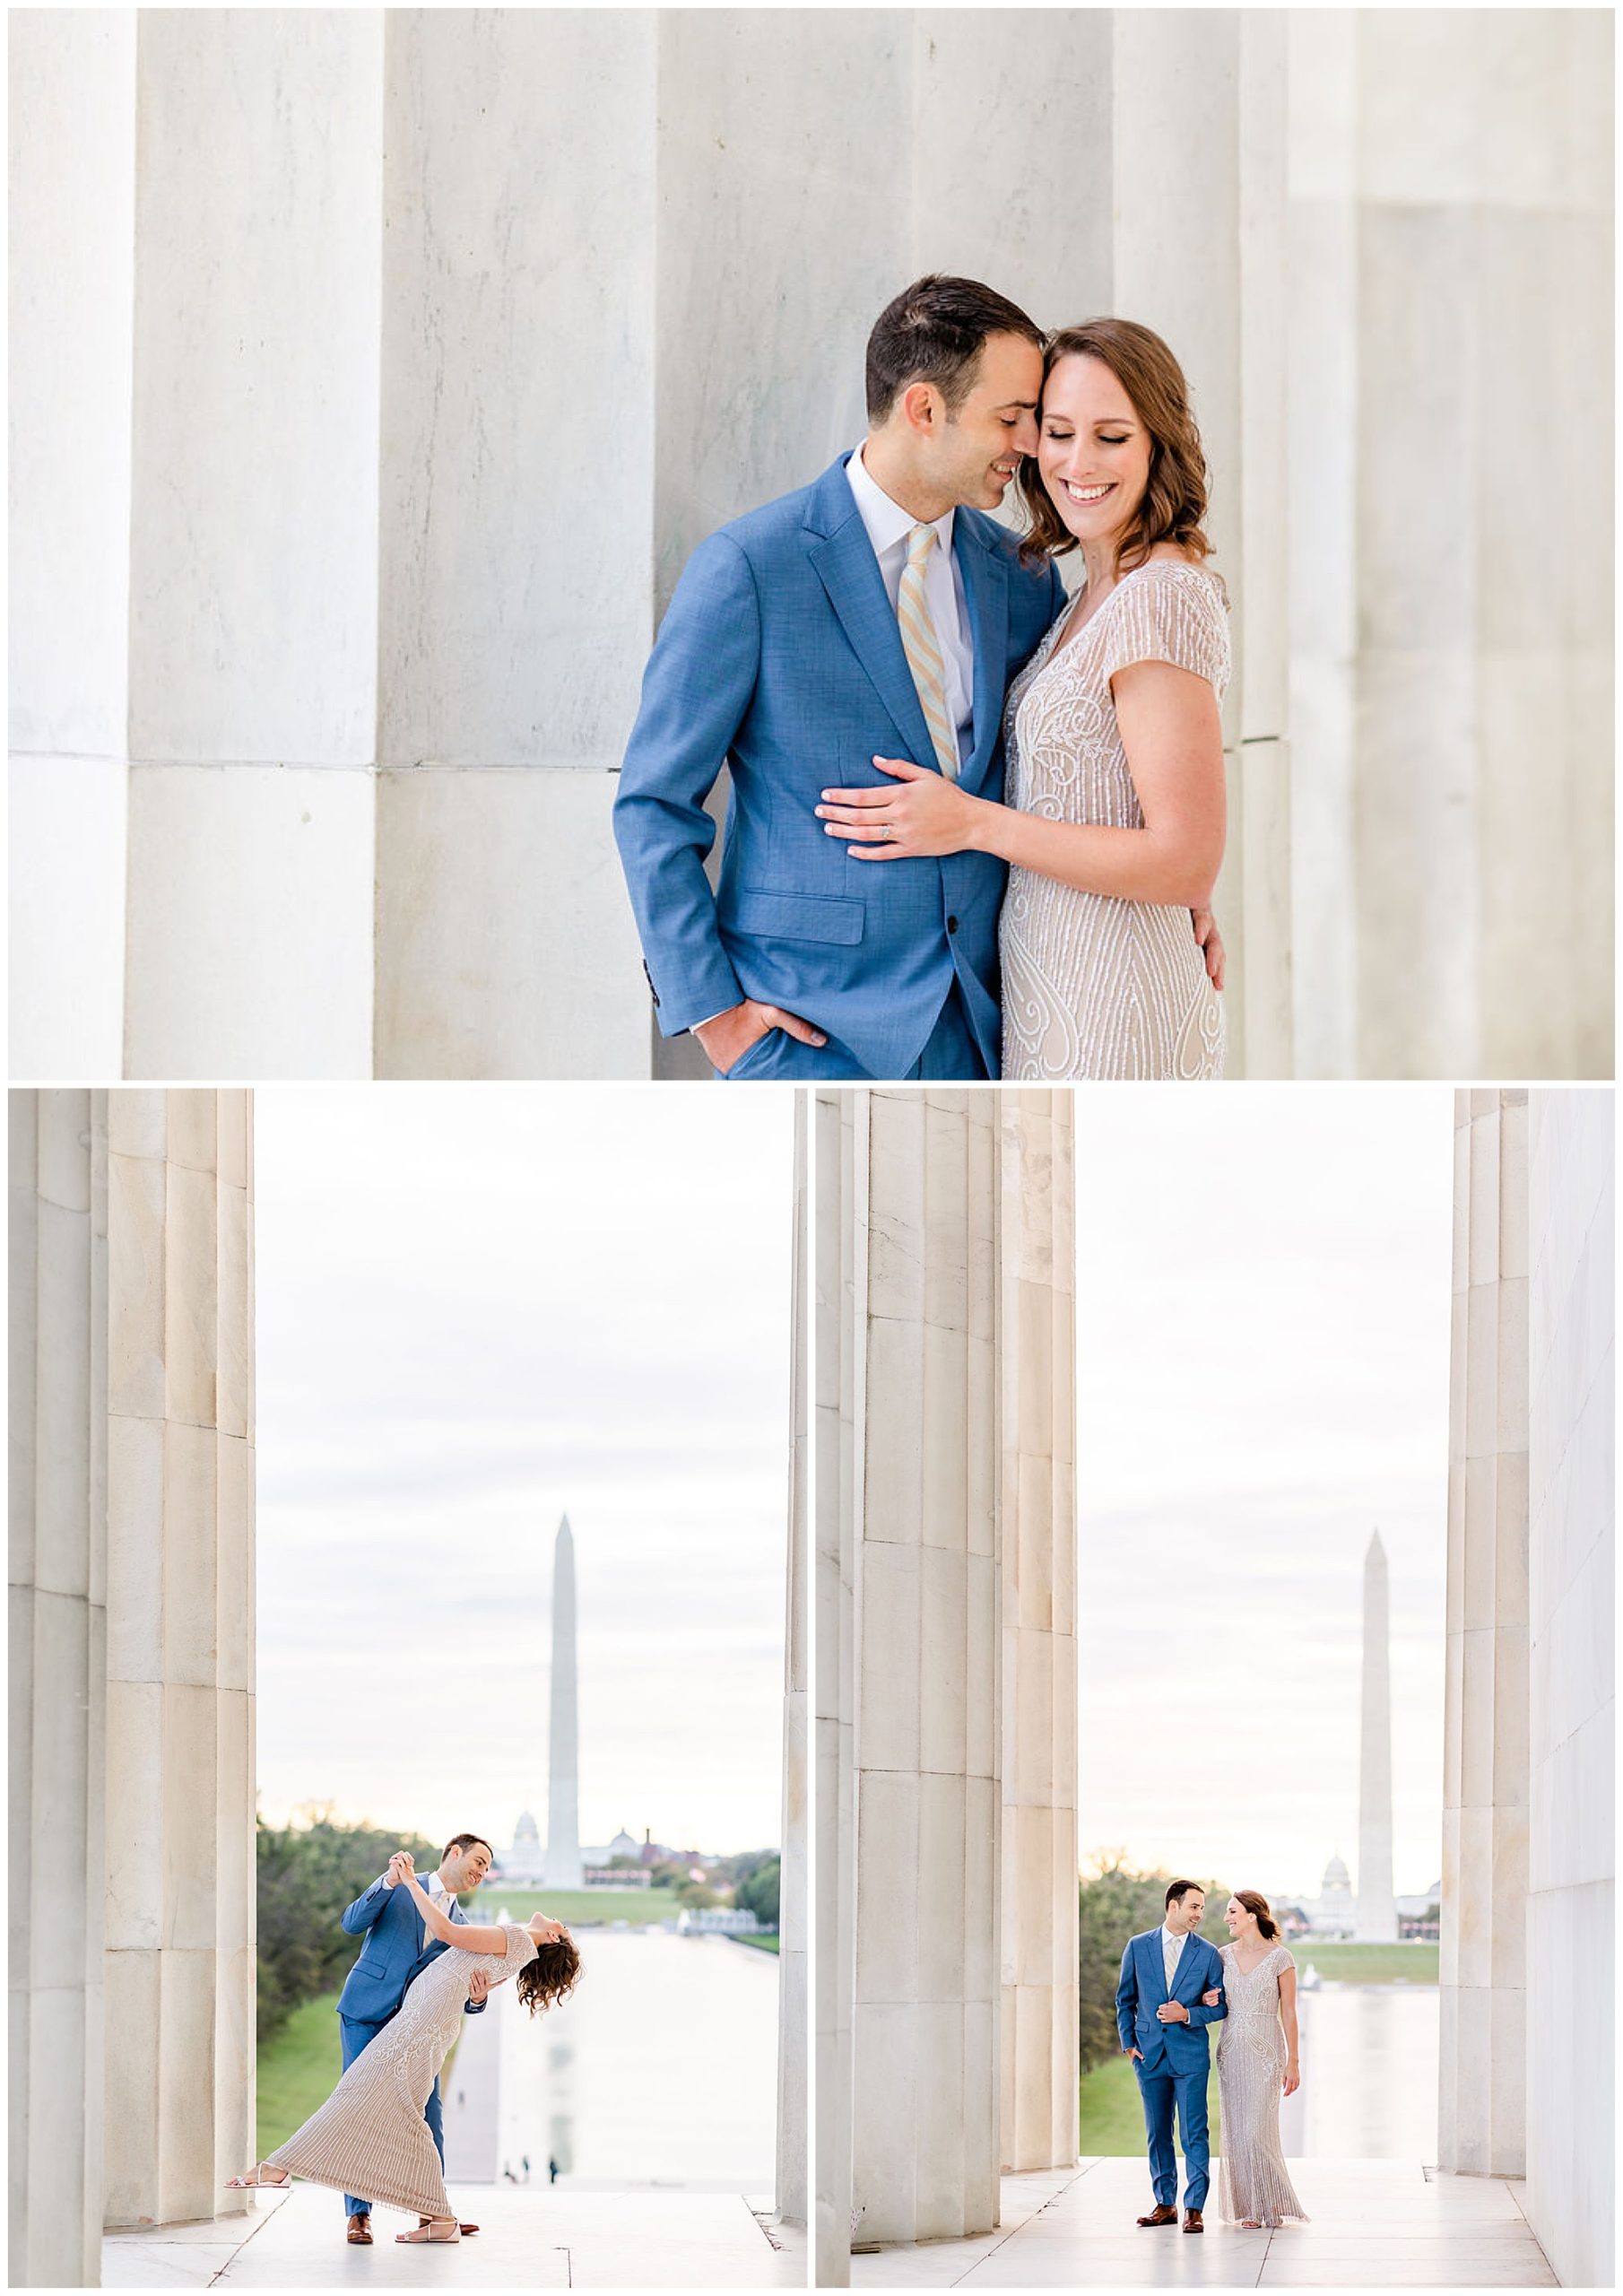 formal DC engagement portraits, Washington DC engagement photos, DC engagement photographer, DC portraits, BHLDN dress, autumn engagement portraits, formal engagement photos, formal portraits, Rachel E.H. Photography, man dipping woman, couple linking arms